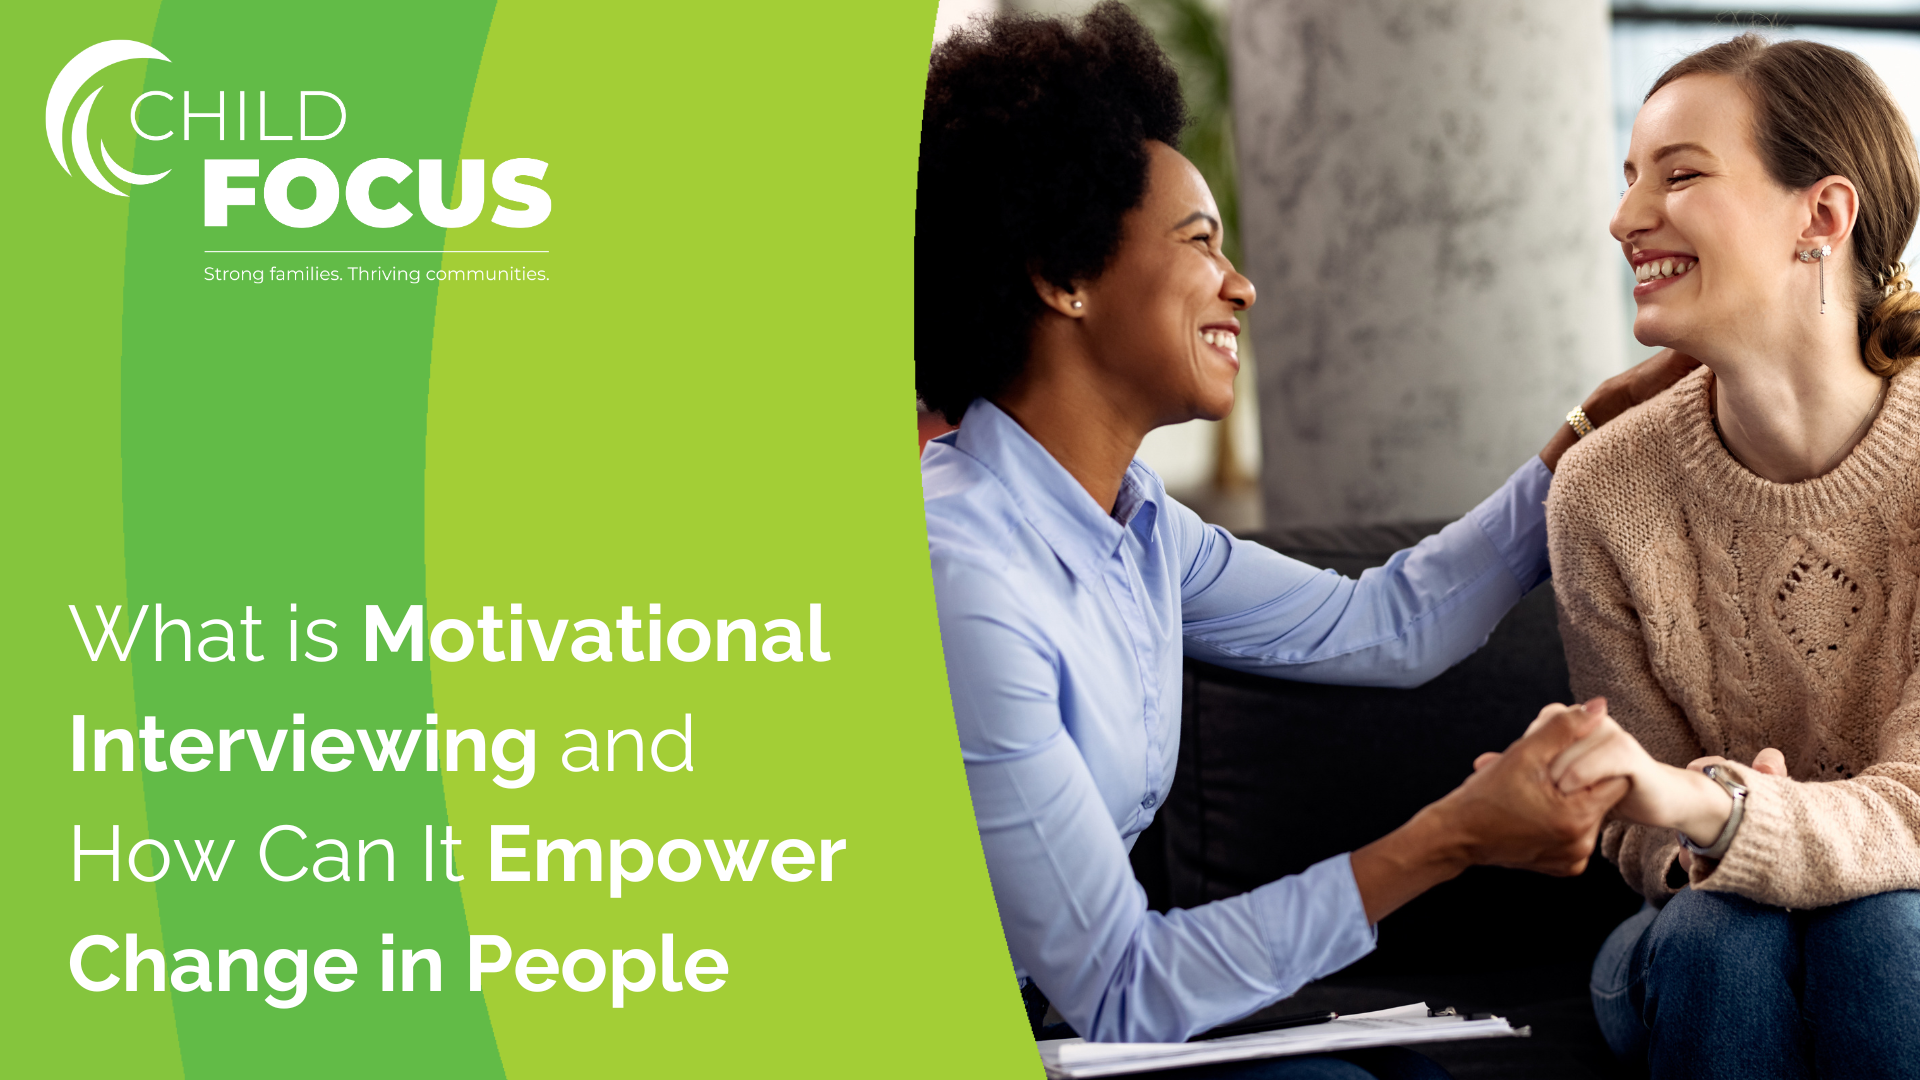 Two women smiling at each other. The text reads, "What is Motivational Interviewing and How Can It Empower Change in People?" 